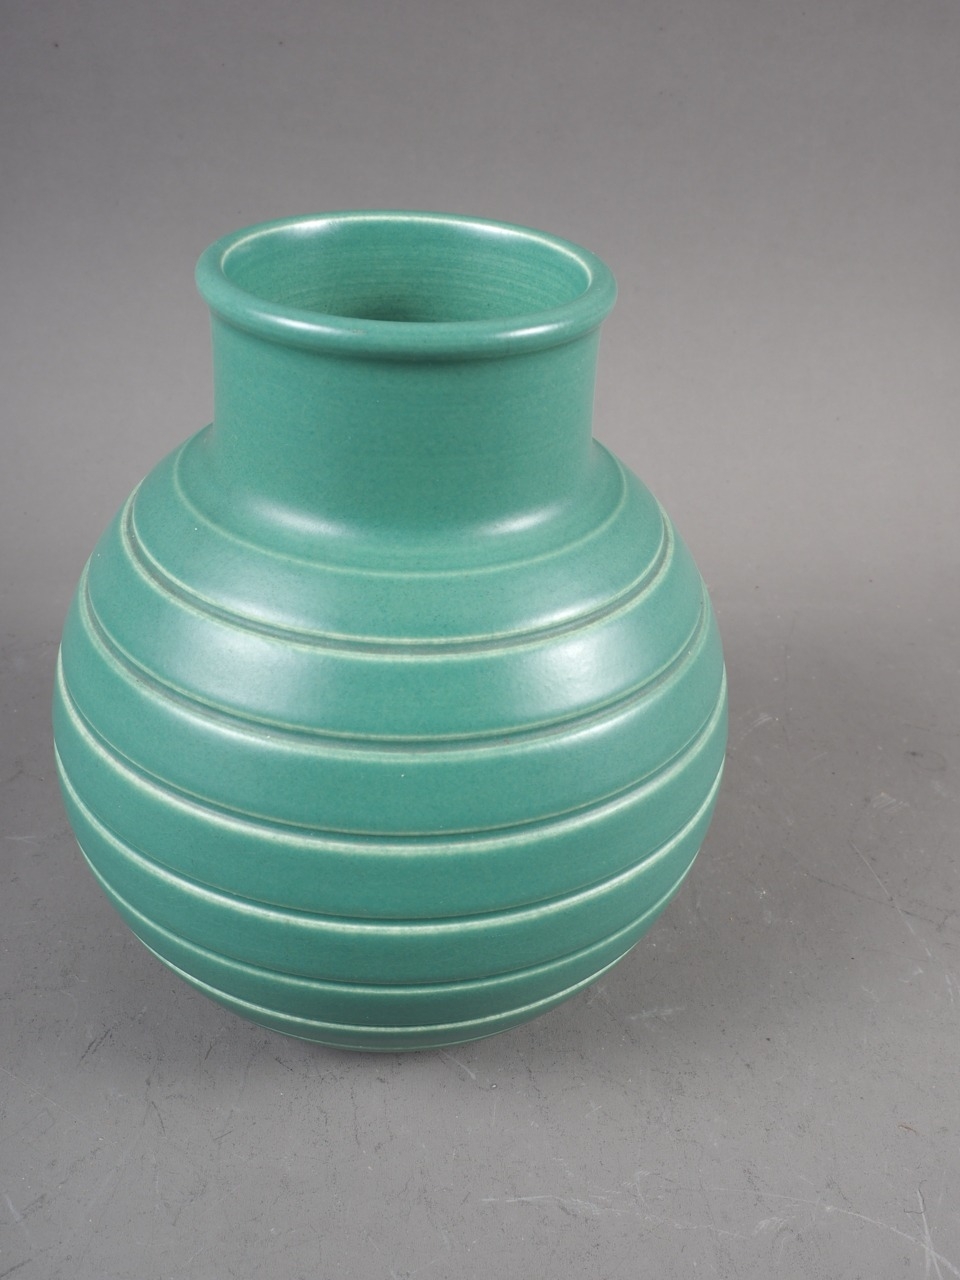 A Keith Murray Wedgwood bulbous green glazed vase with line design, 6 1/4" high, and three Keith - Image 5 of 6